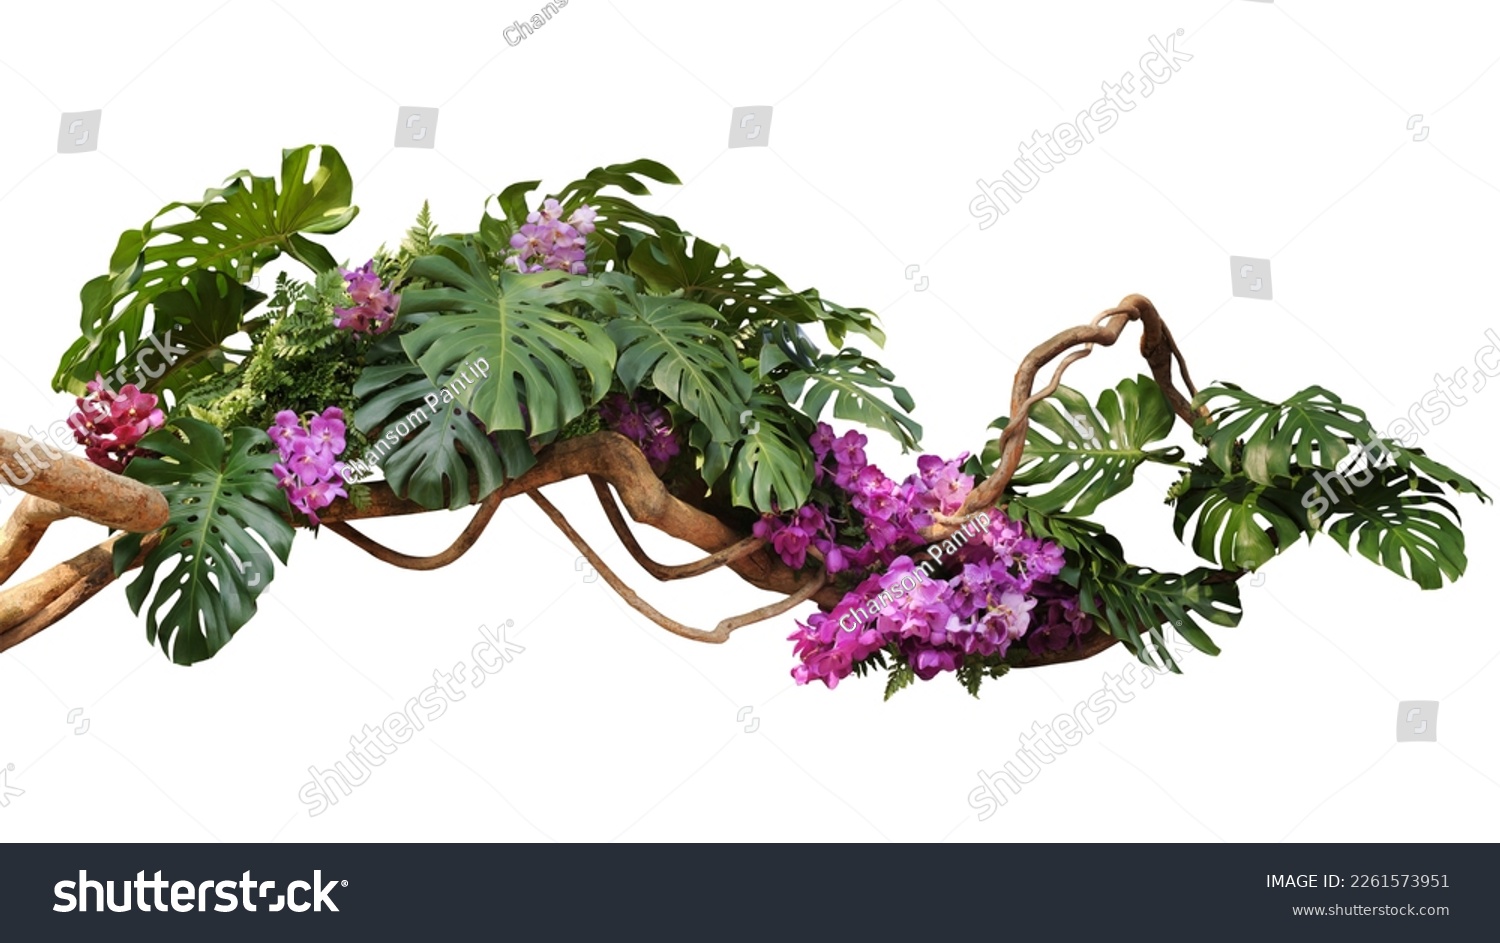 Tropical vibes plant bush floral arrangement with tropical leaves Monstera and fern and Vanda orchids tropical flower decor on tree branch liana vine plant isolated on white background. #2261573951